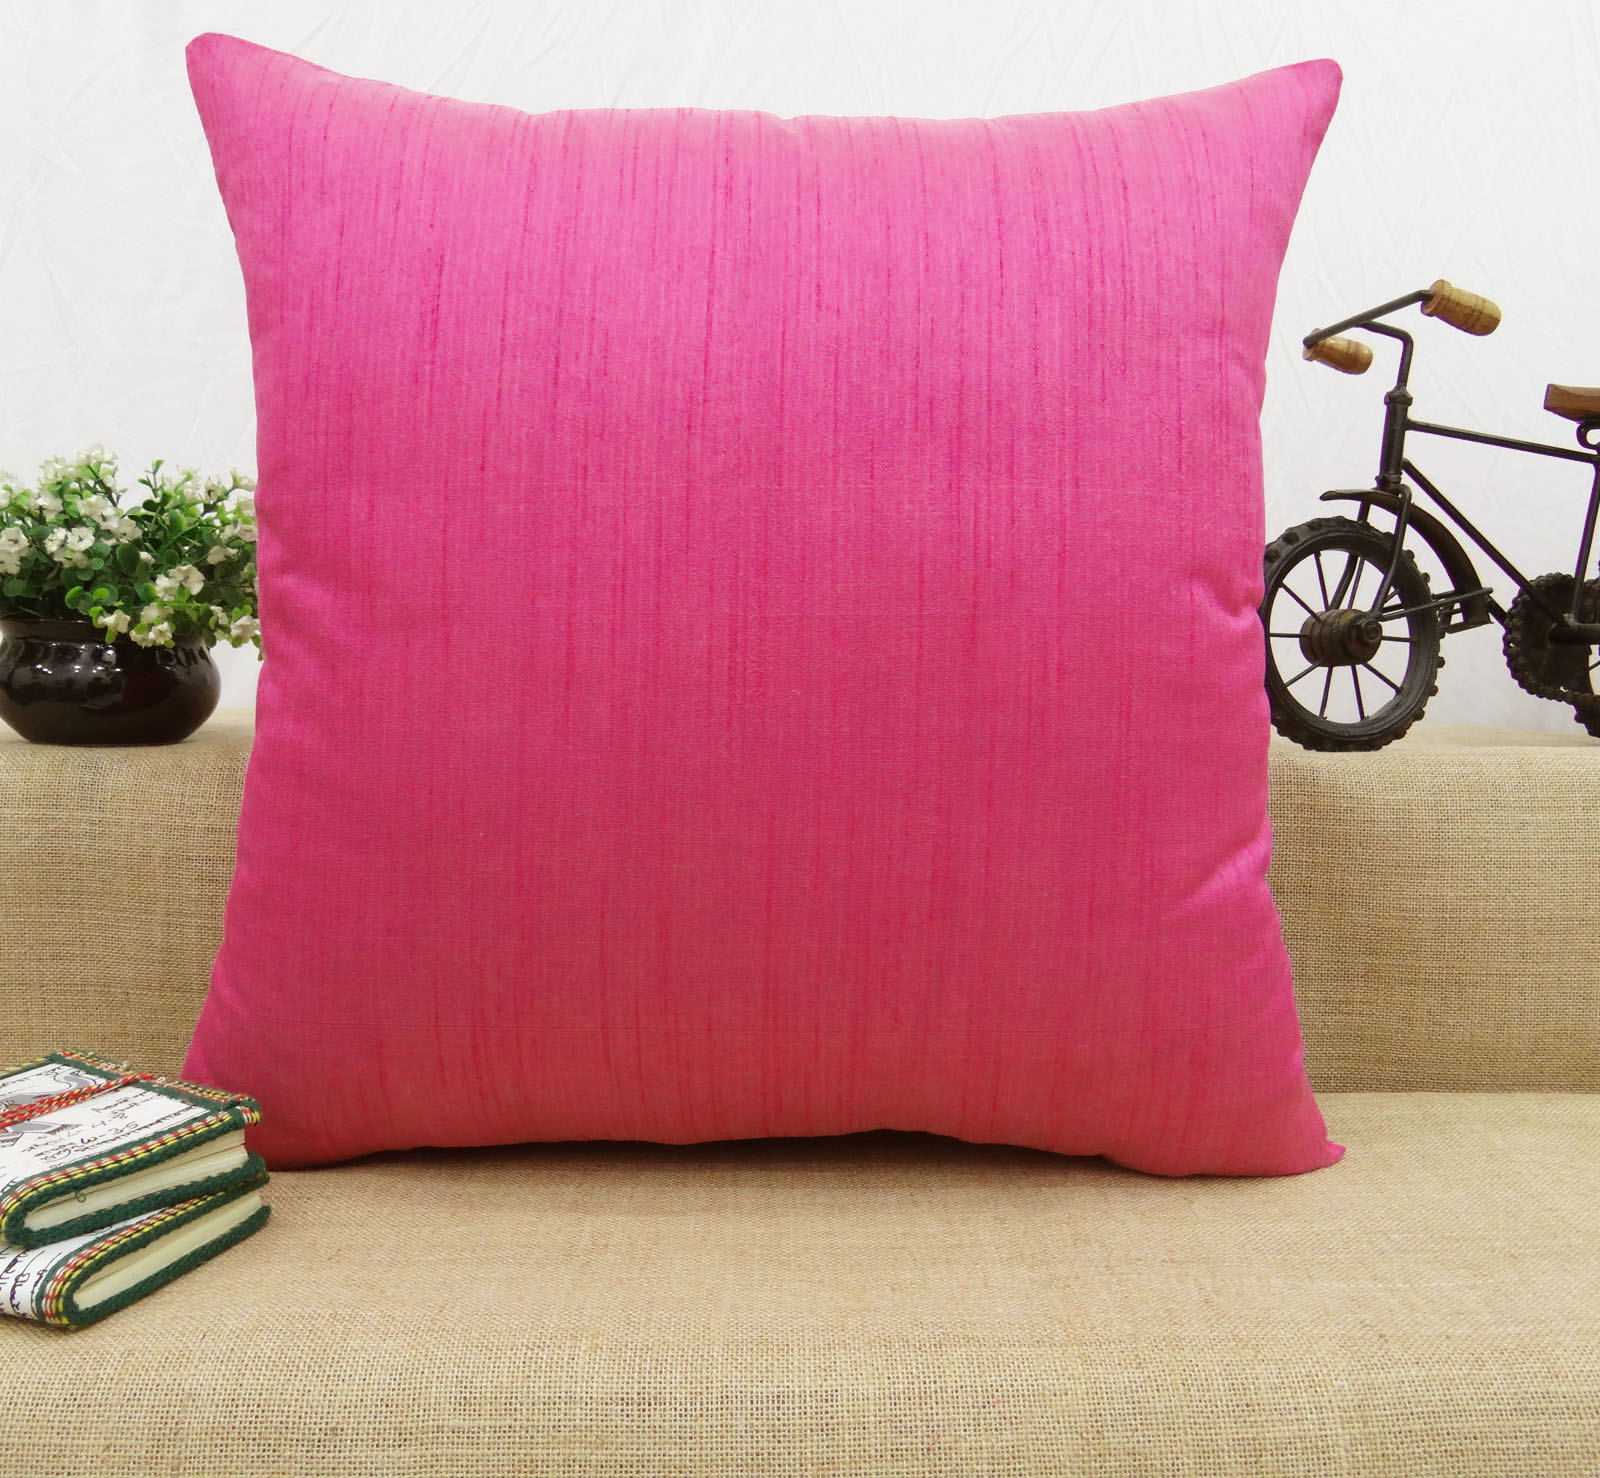 Home Bed Decor Dupion Silk Solid Pillow Throw Cushion Cover Case Choose Size 